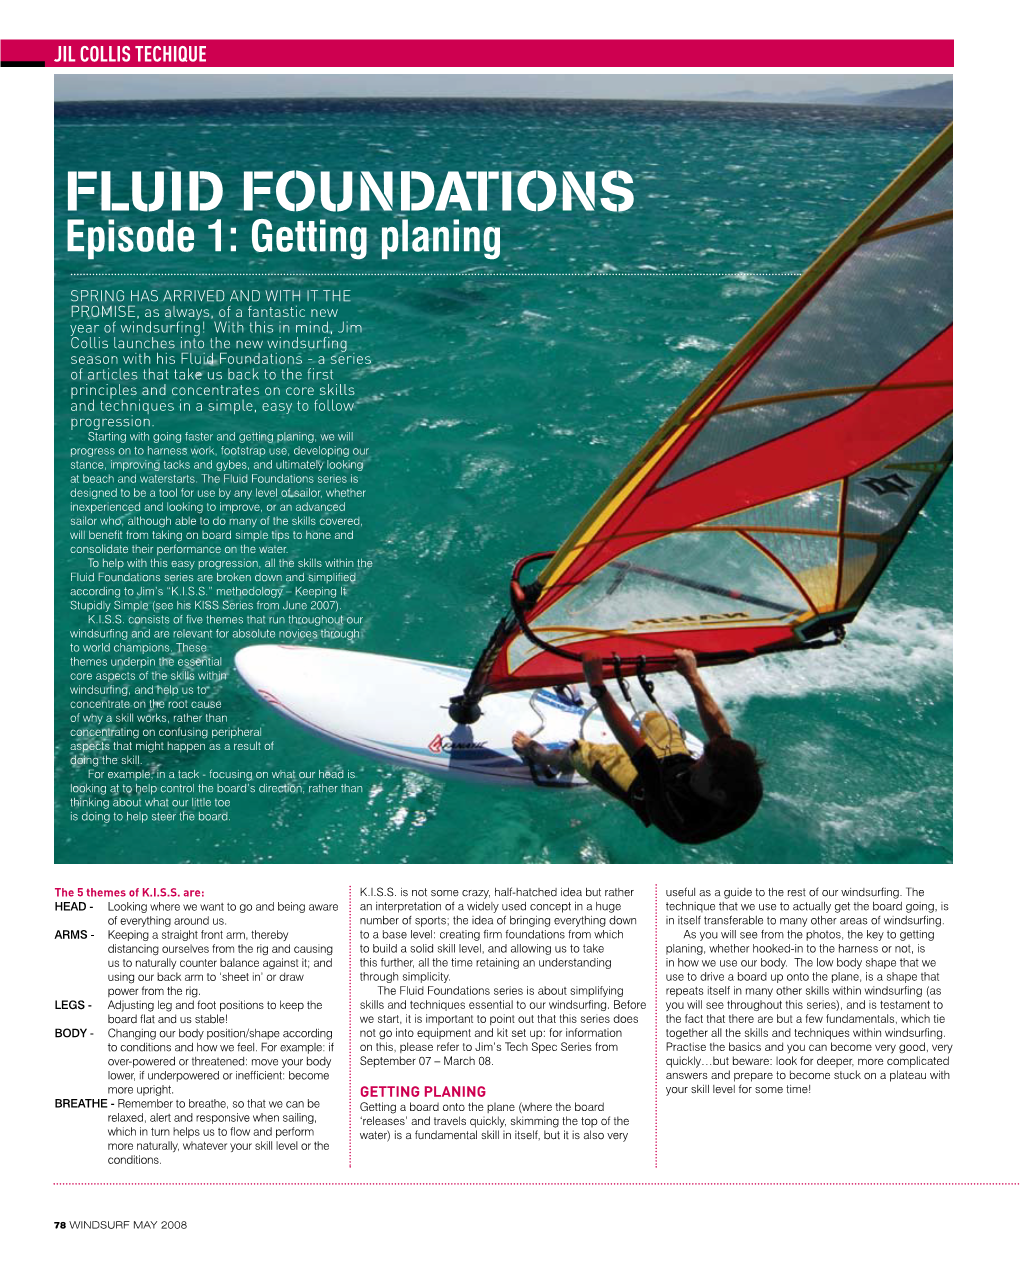 FLUID FOUNDATIONS Episode 1: Getting Planing